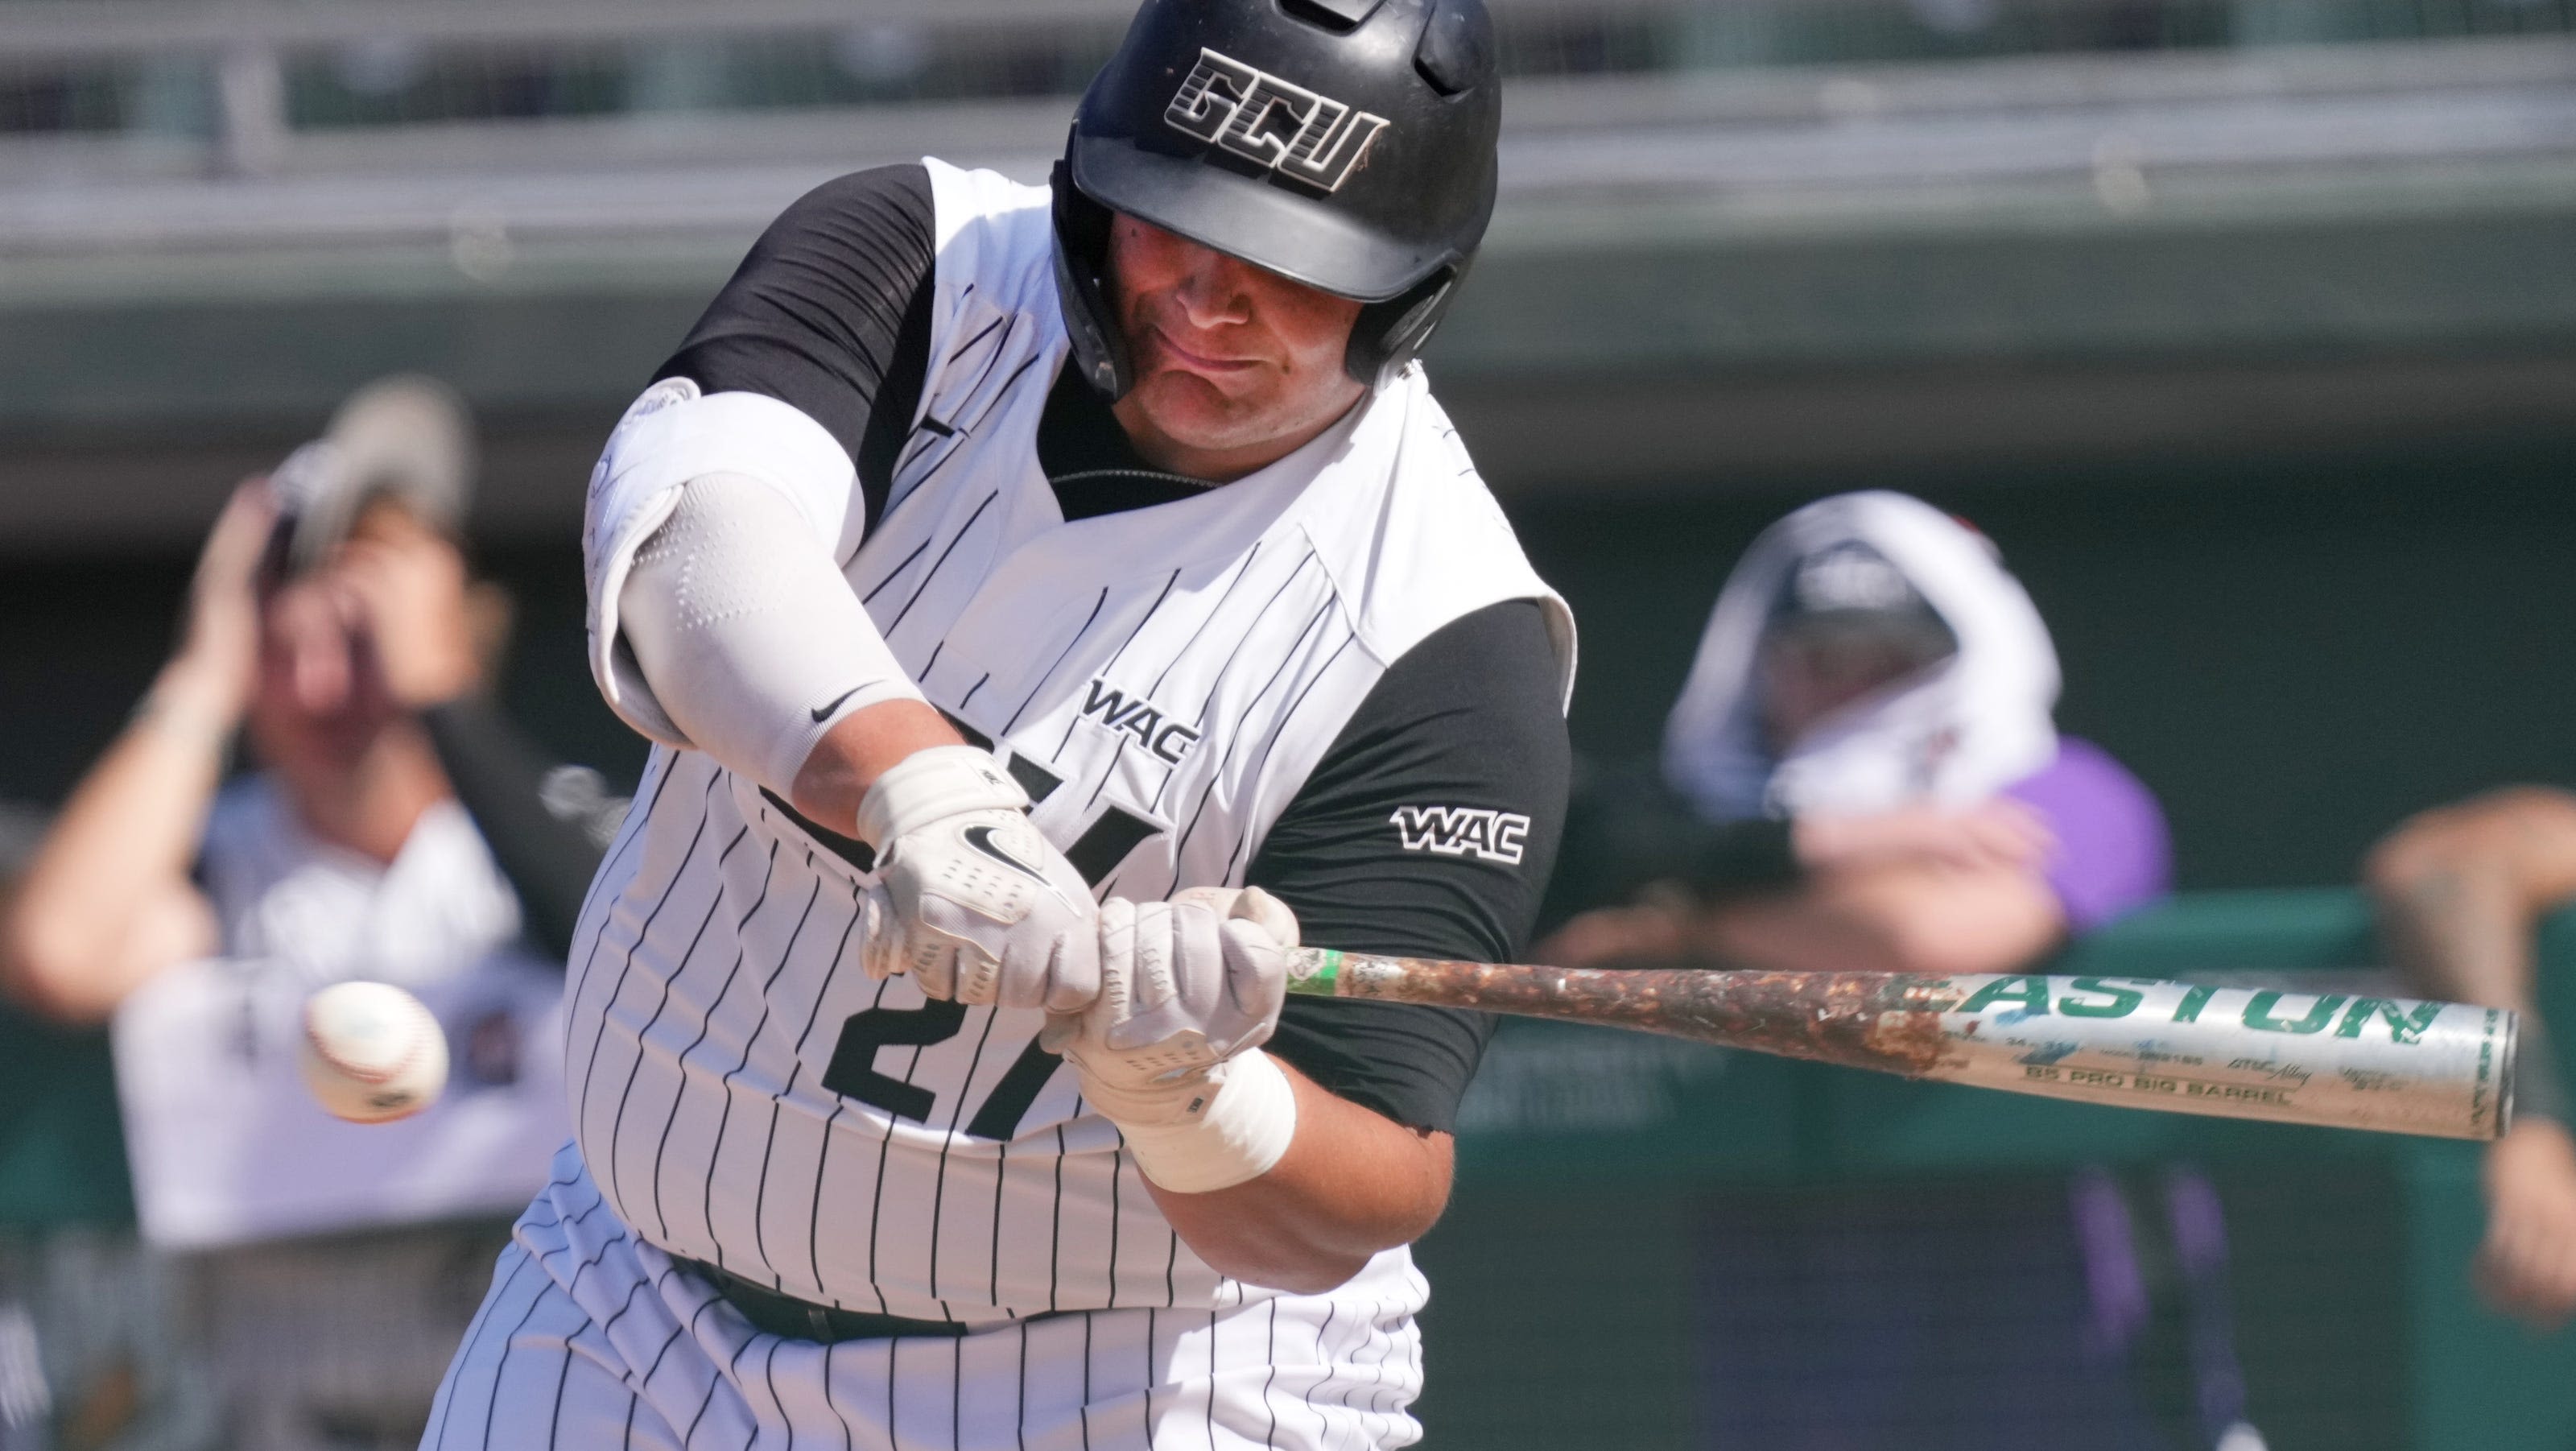 Top-seed GCU baseball eliminated from WAC tournament with 2 losses on same day